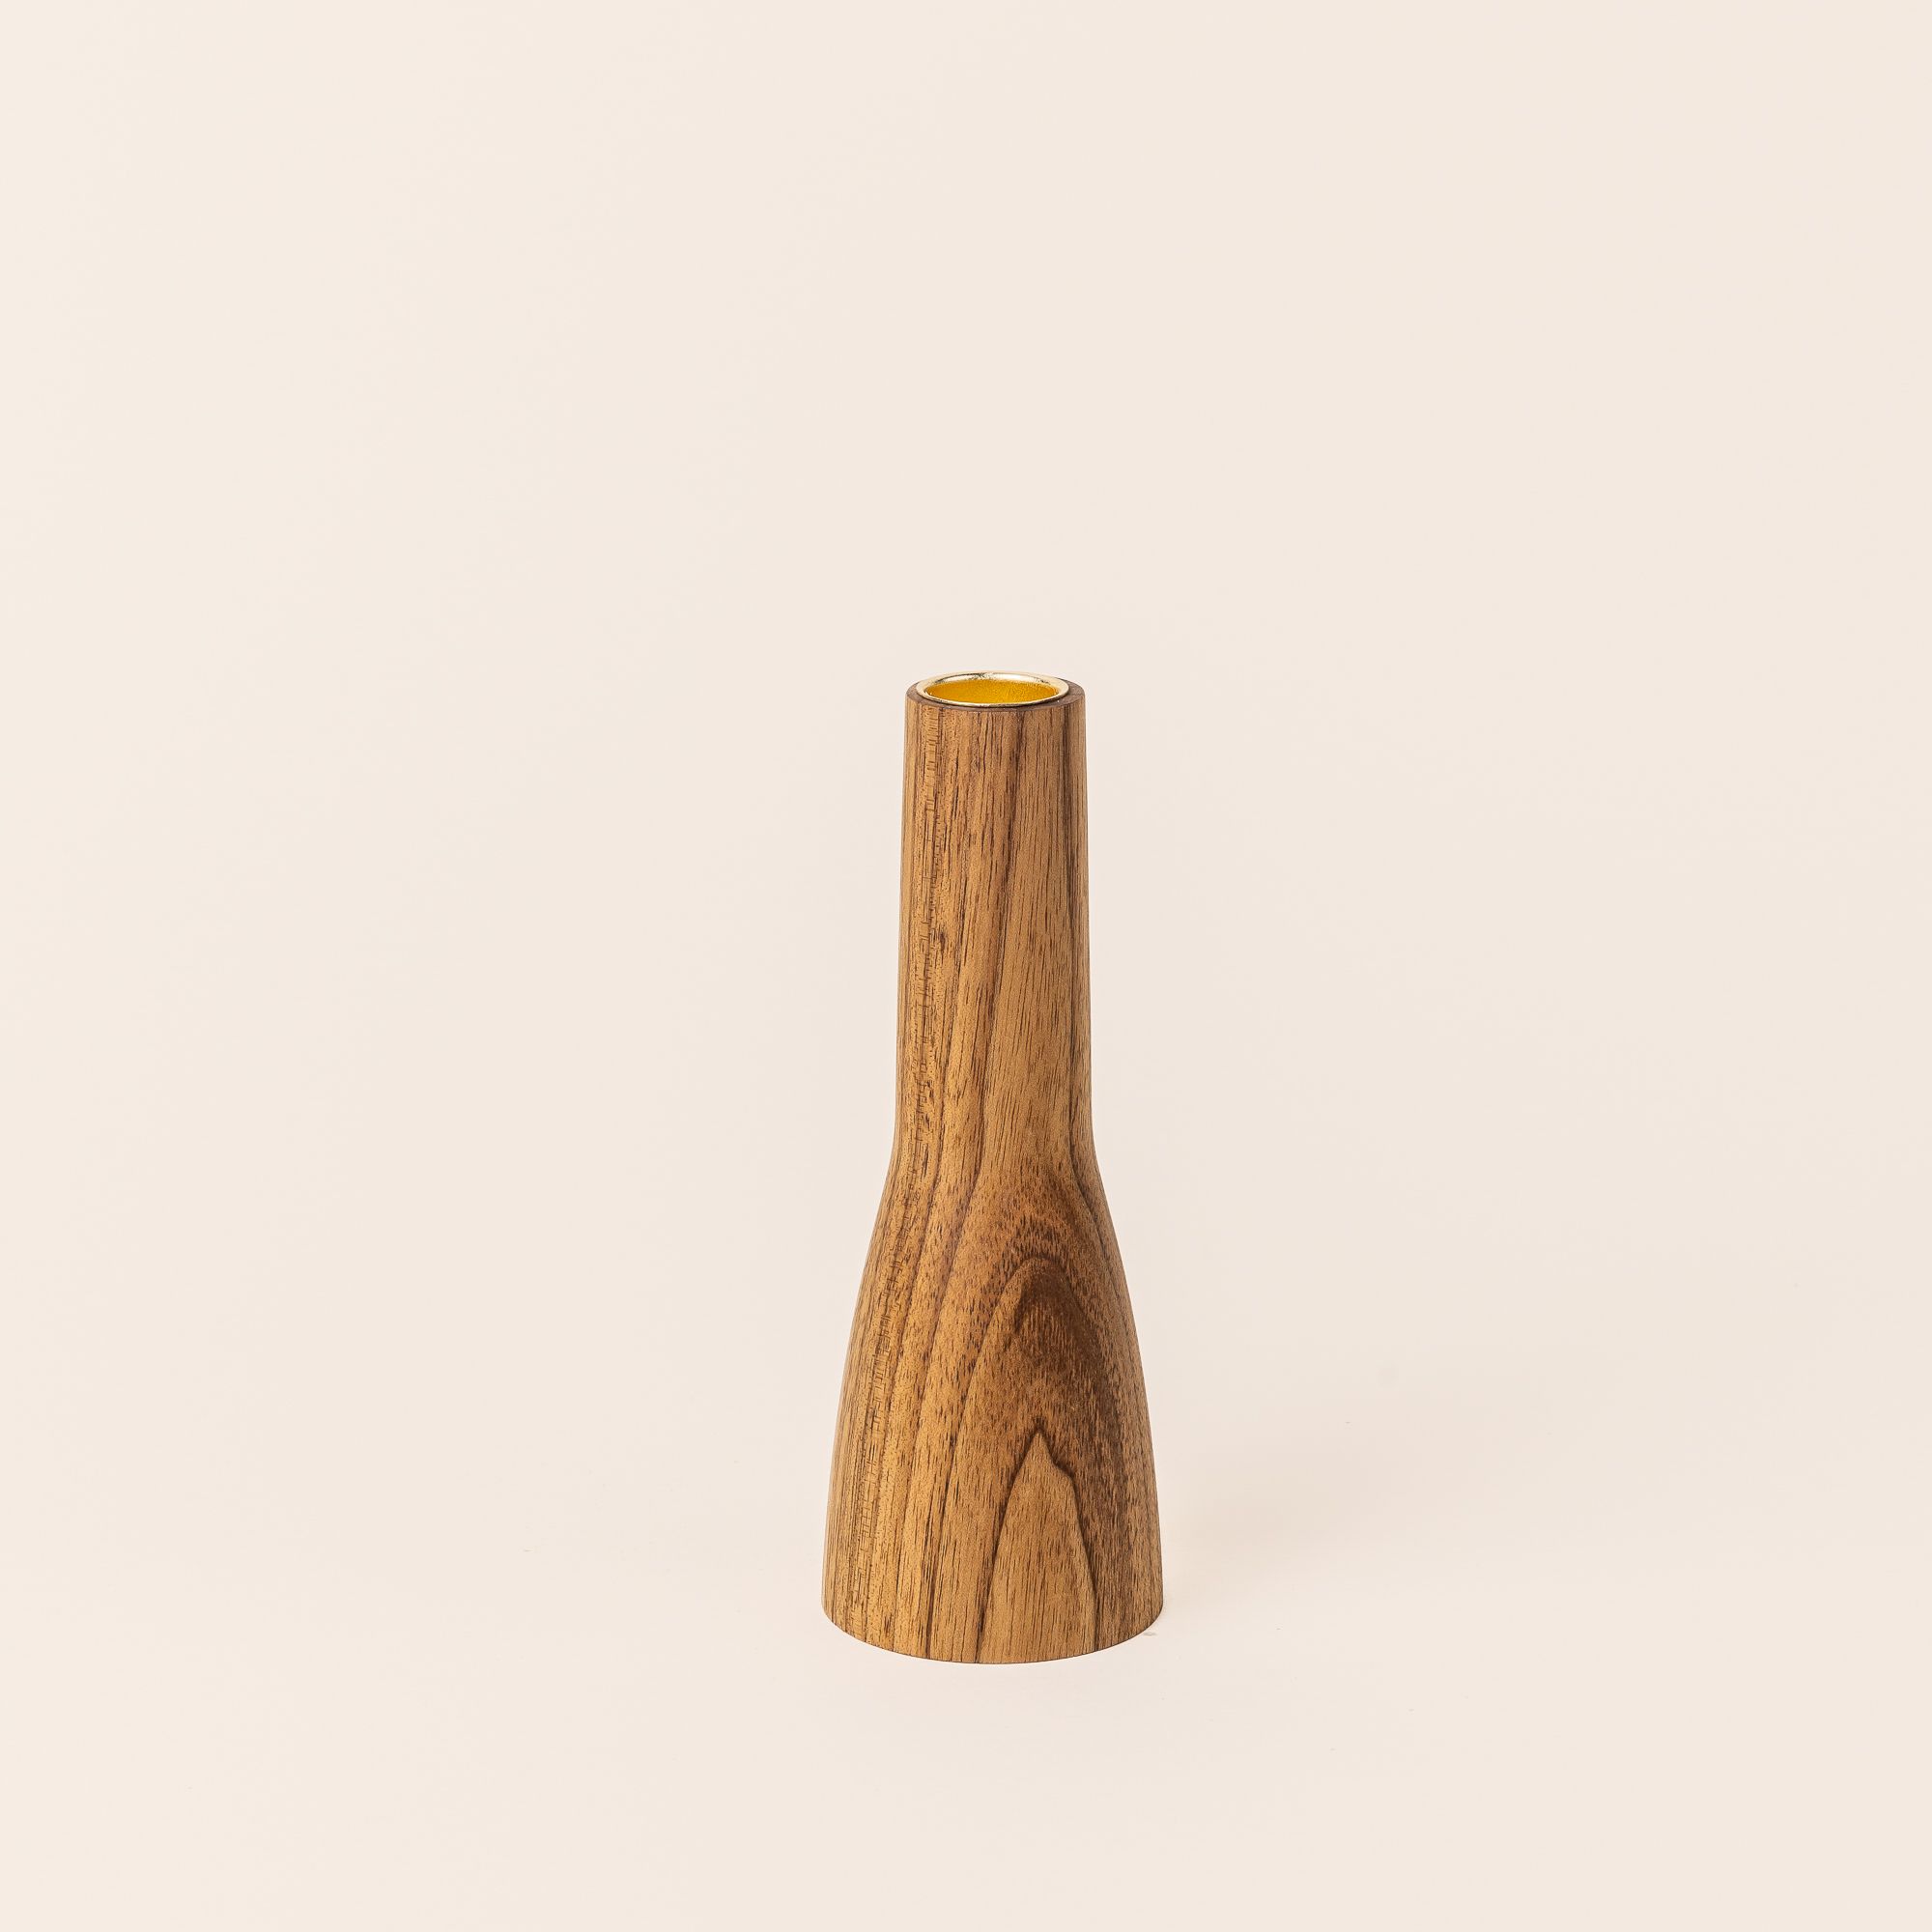 A butternut wood candle holder that is narrow shaped with a wider base on the bottom half and a thinner cylinder on the top half. On top is a a gold carved circle to hold the candle